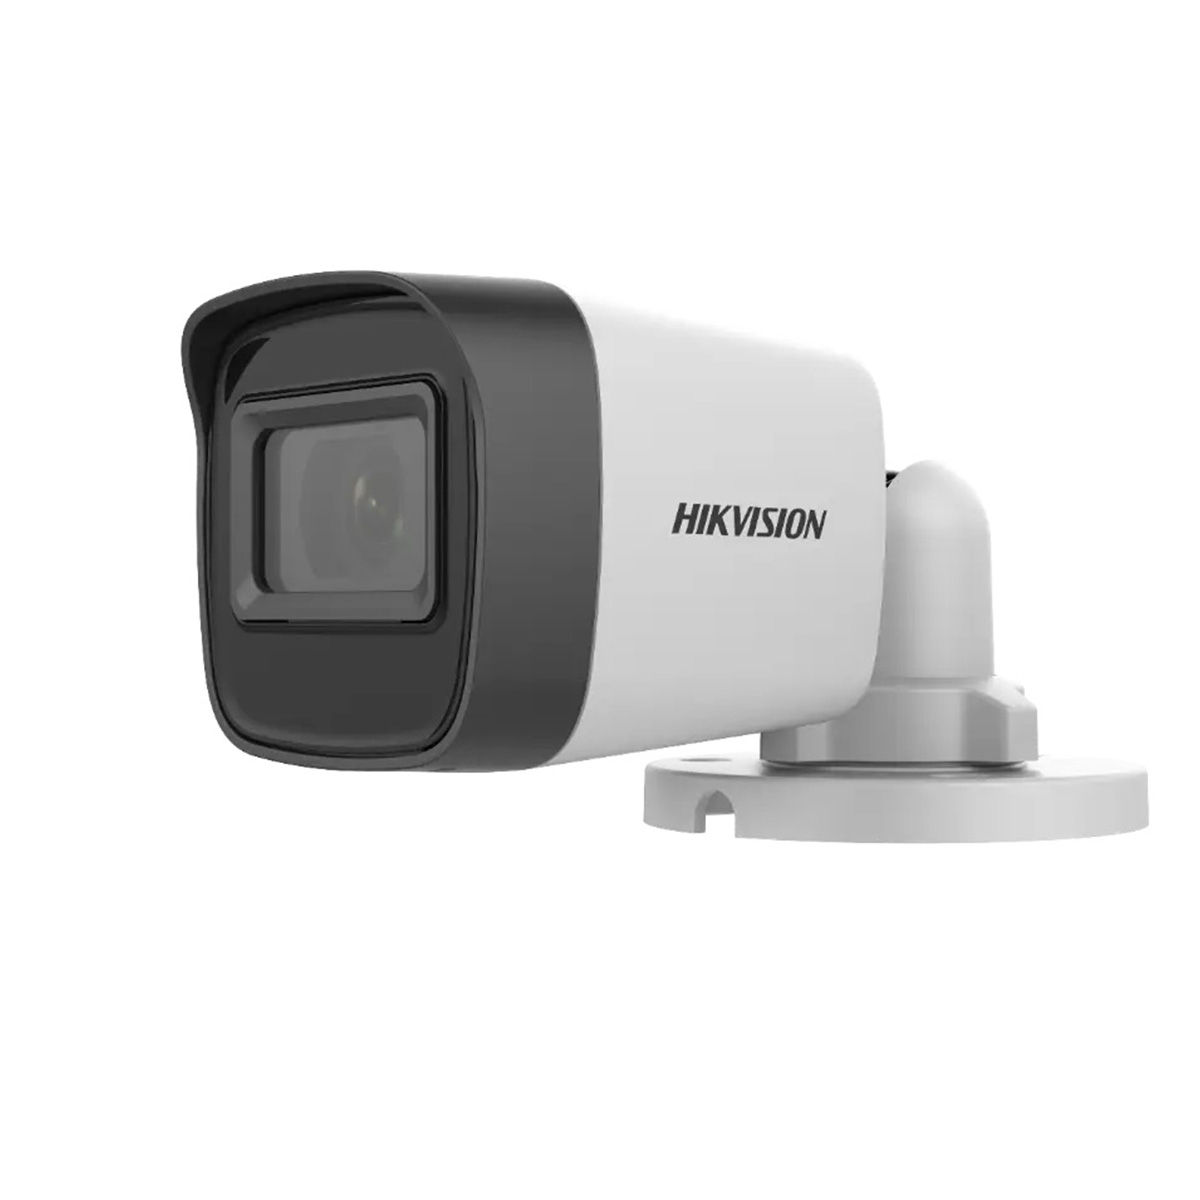 Hikvision 2MP Outdoor EXIR Fixed Bullet Camera – DS-2CE16D0T-EXIPF